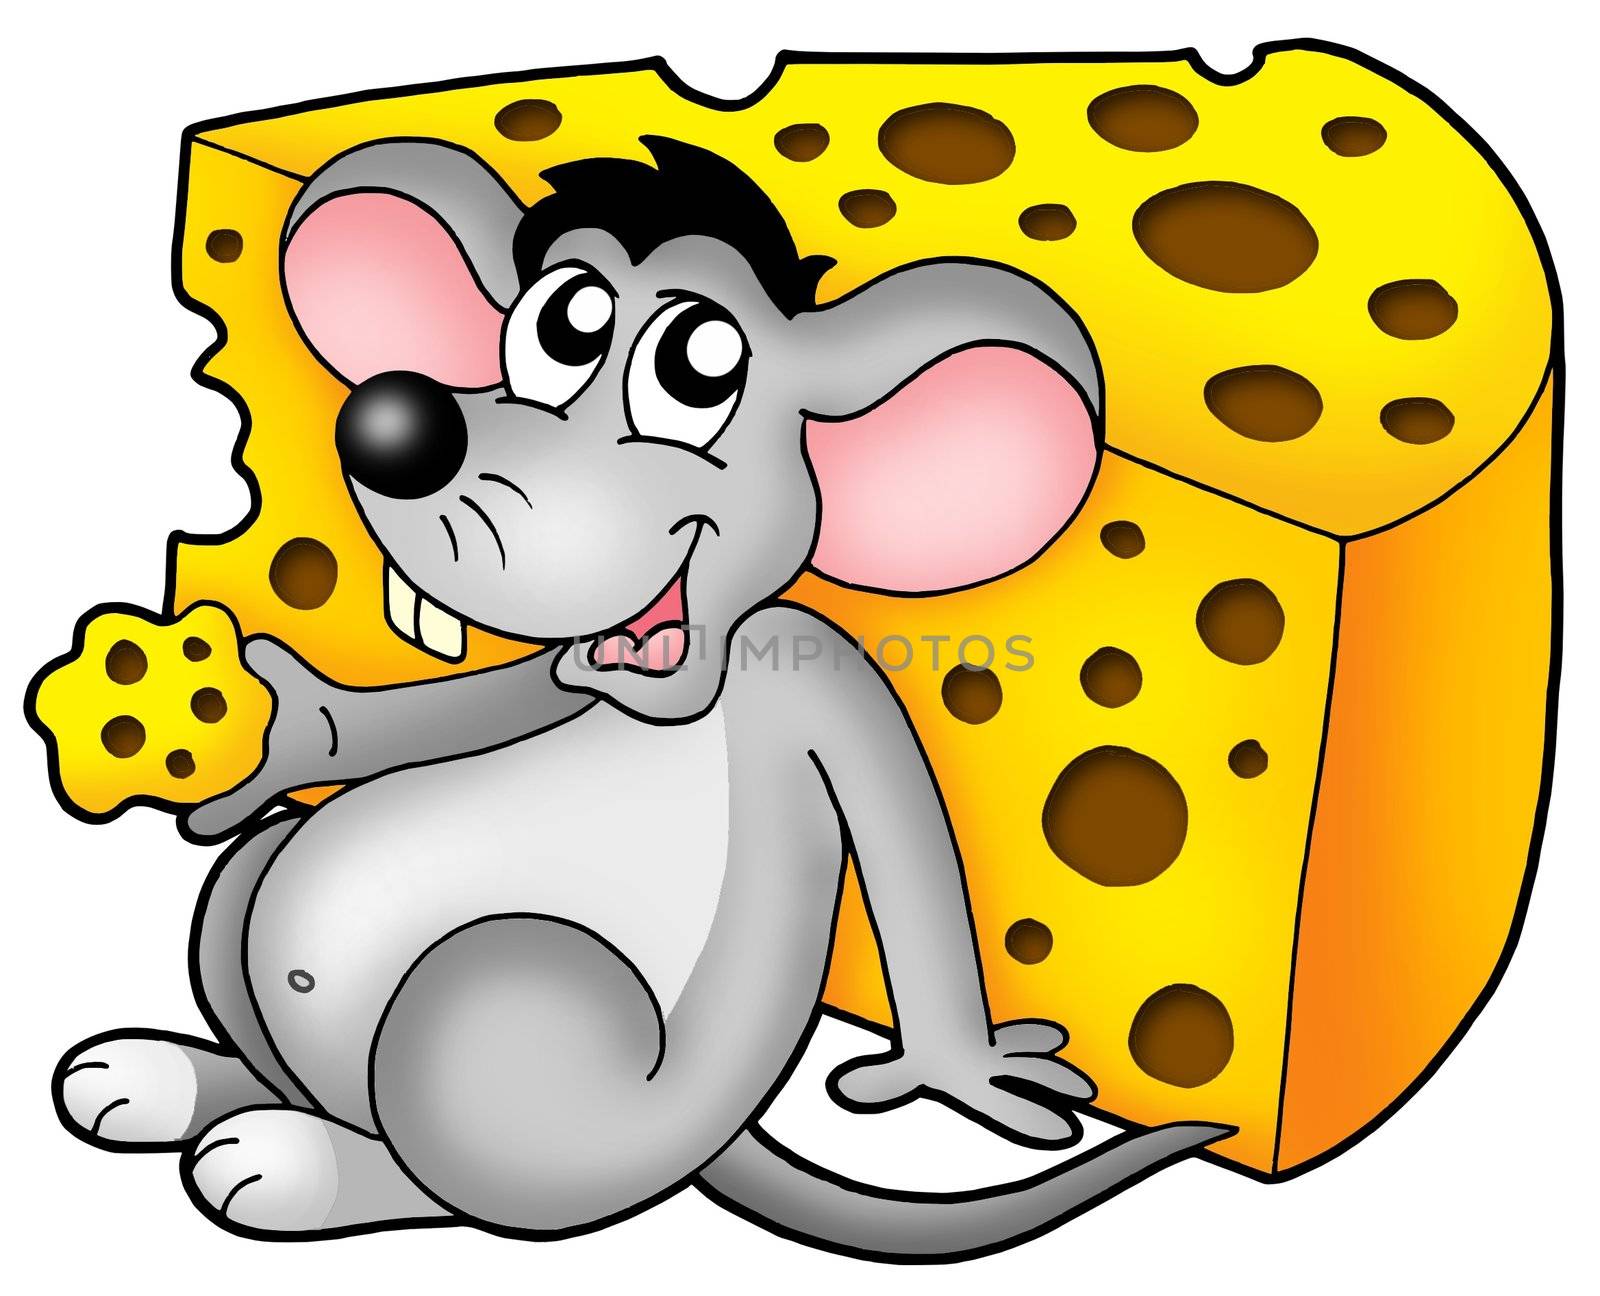 Cute mouse eating cheese - color illustration.